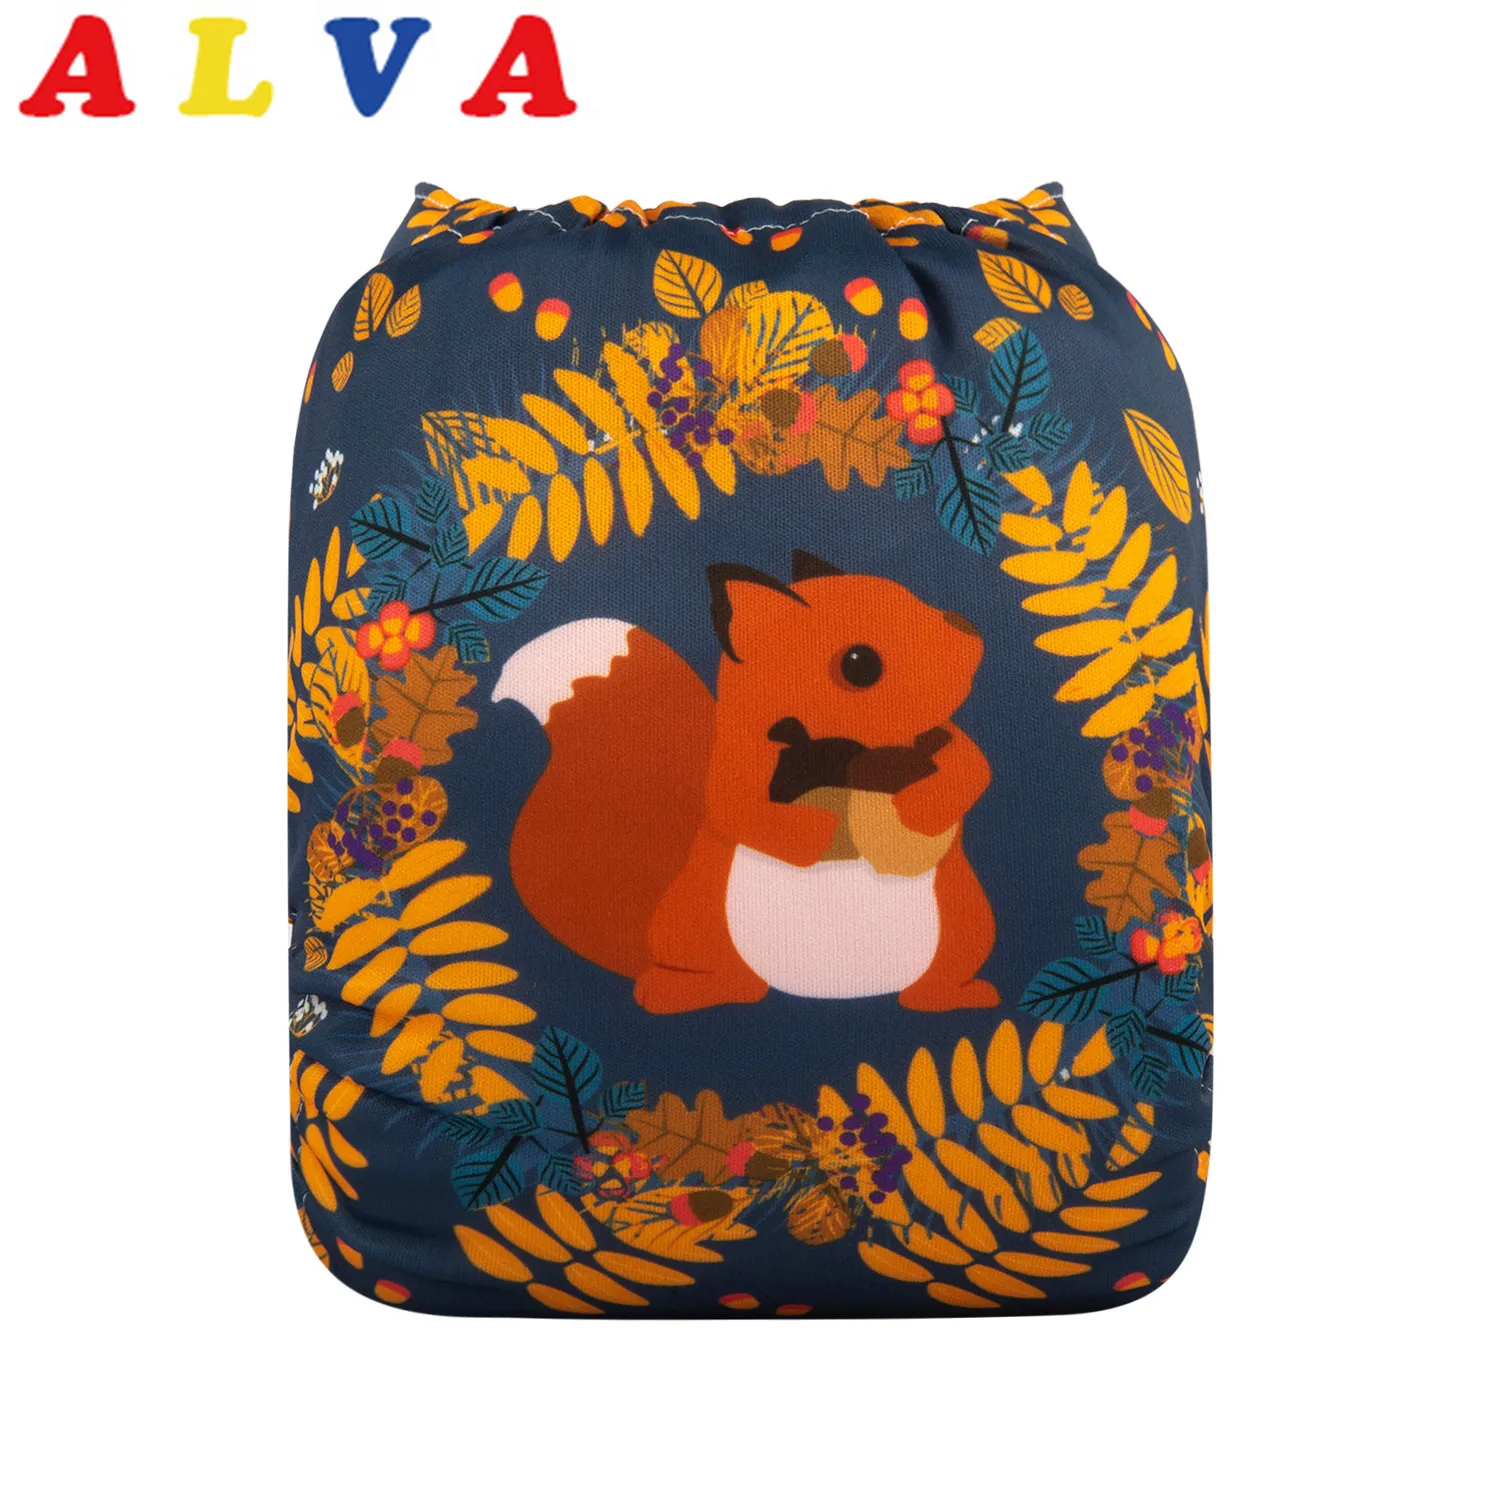 Cut Price New Arrival! Alvababy Cloth Diapers Baby with Microfiber Insert Myw5eNgd3JA